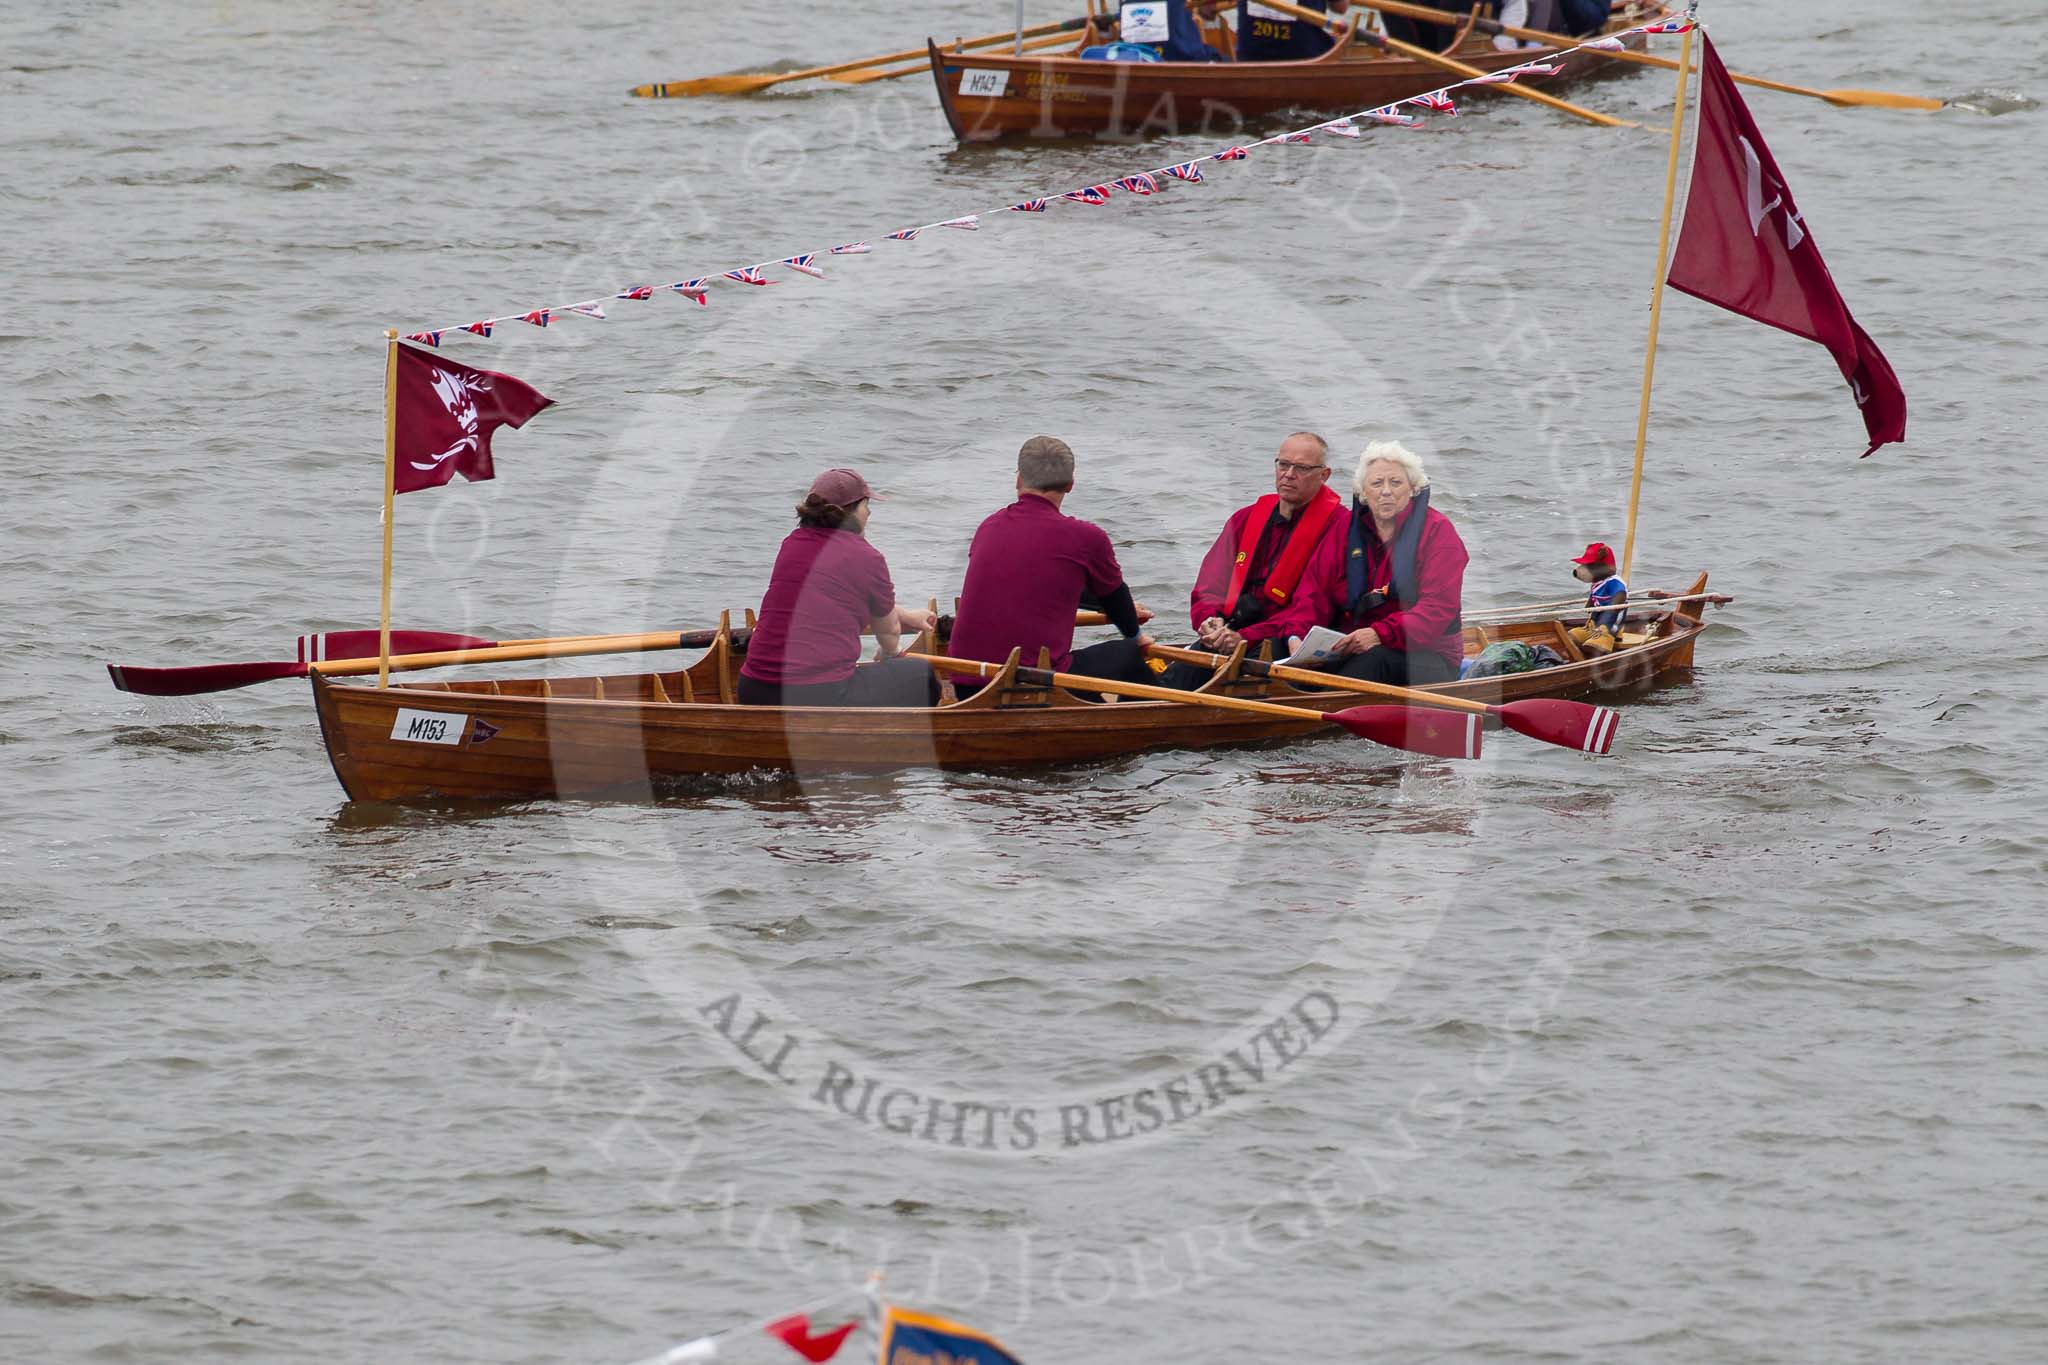 Thames Diamond Jubilee Pageant: SKIFFS & OTHER TRADITIONAL BOATS-Skiff 1 (M153)..
River Thames seen from Battersea Bridge,
London,

United Kingdom,
on 03 June 2012 at 14:45, image #113